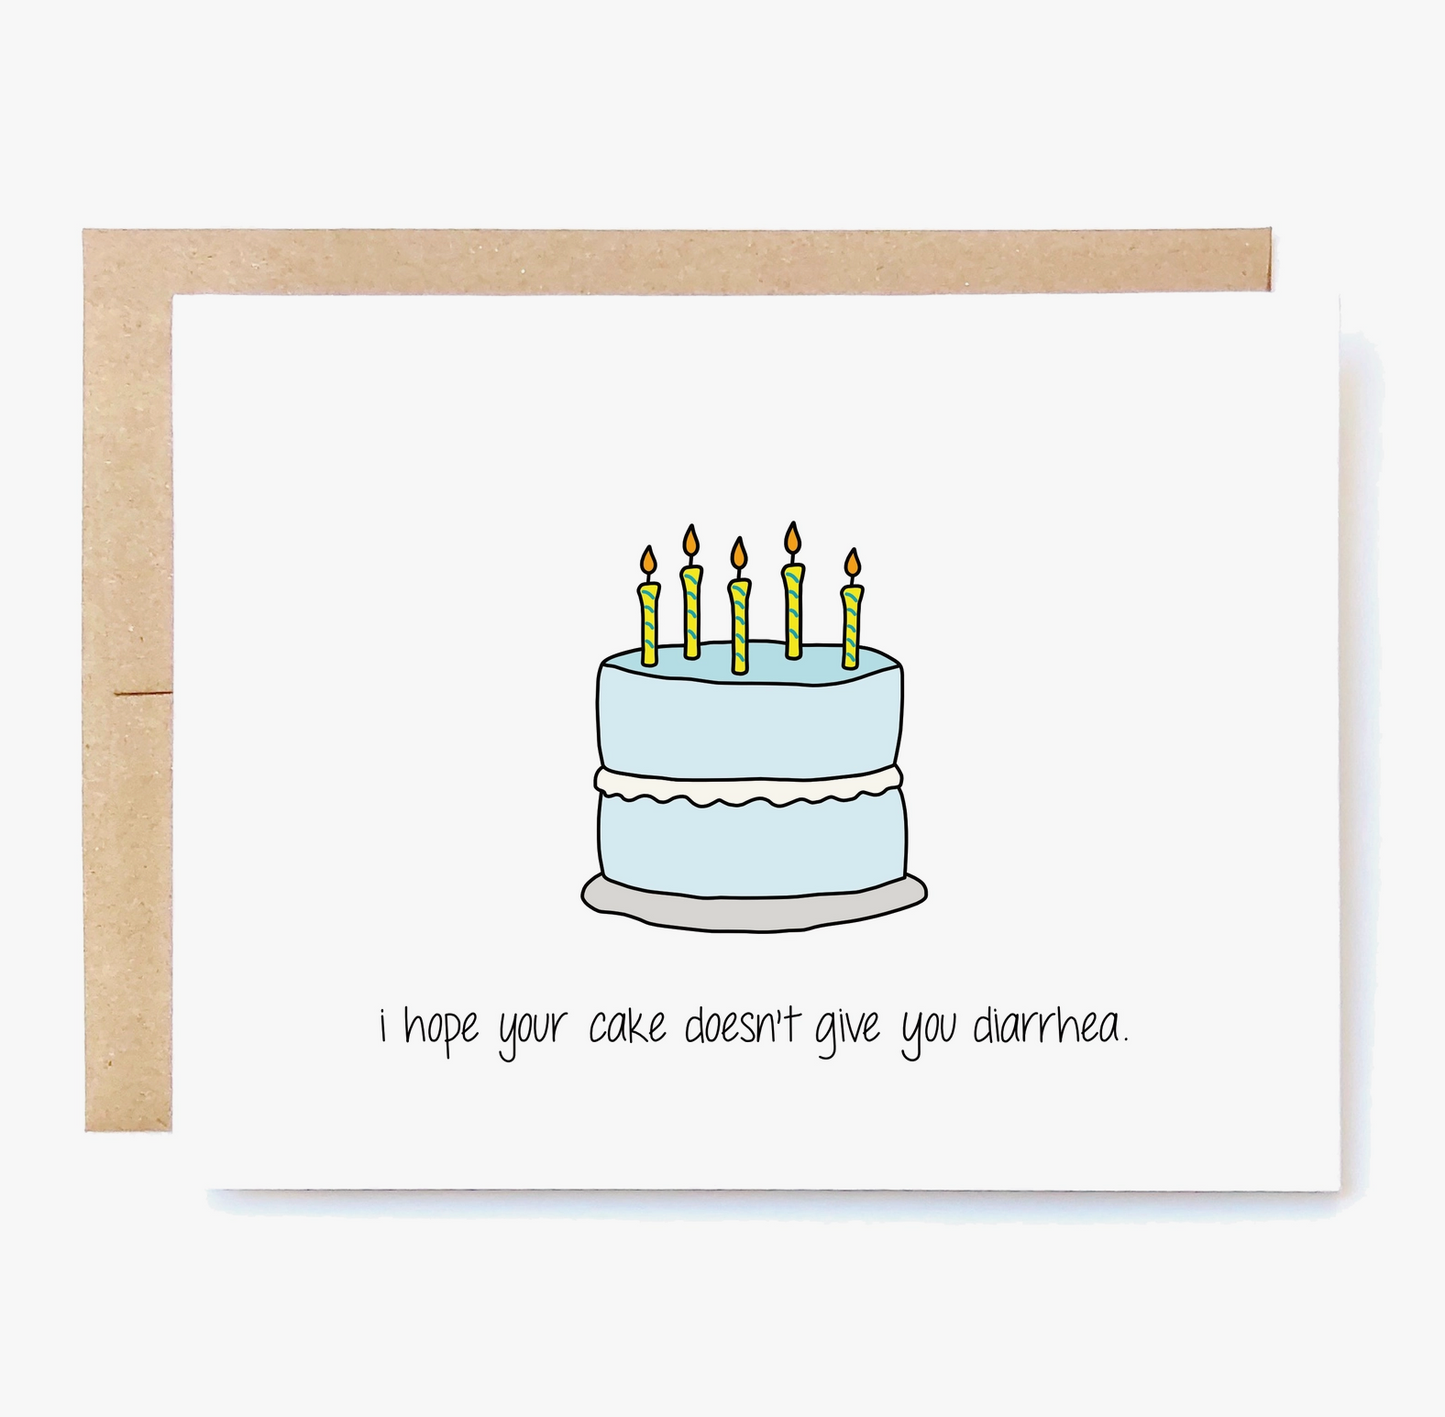 I Hope Your Cake Doesn't Give You Diarrhea Card